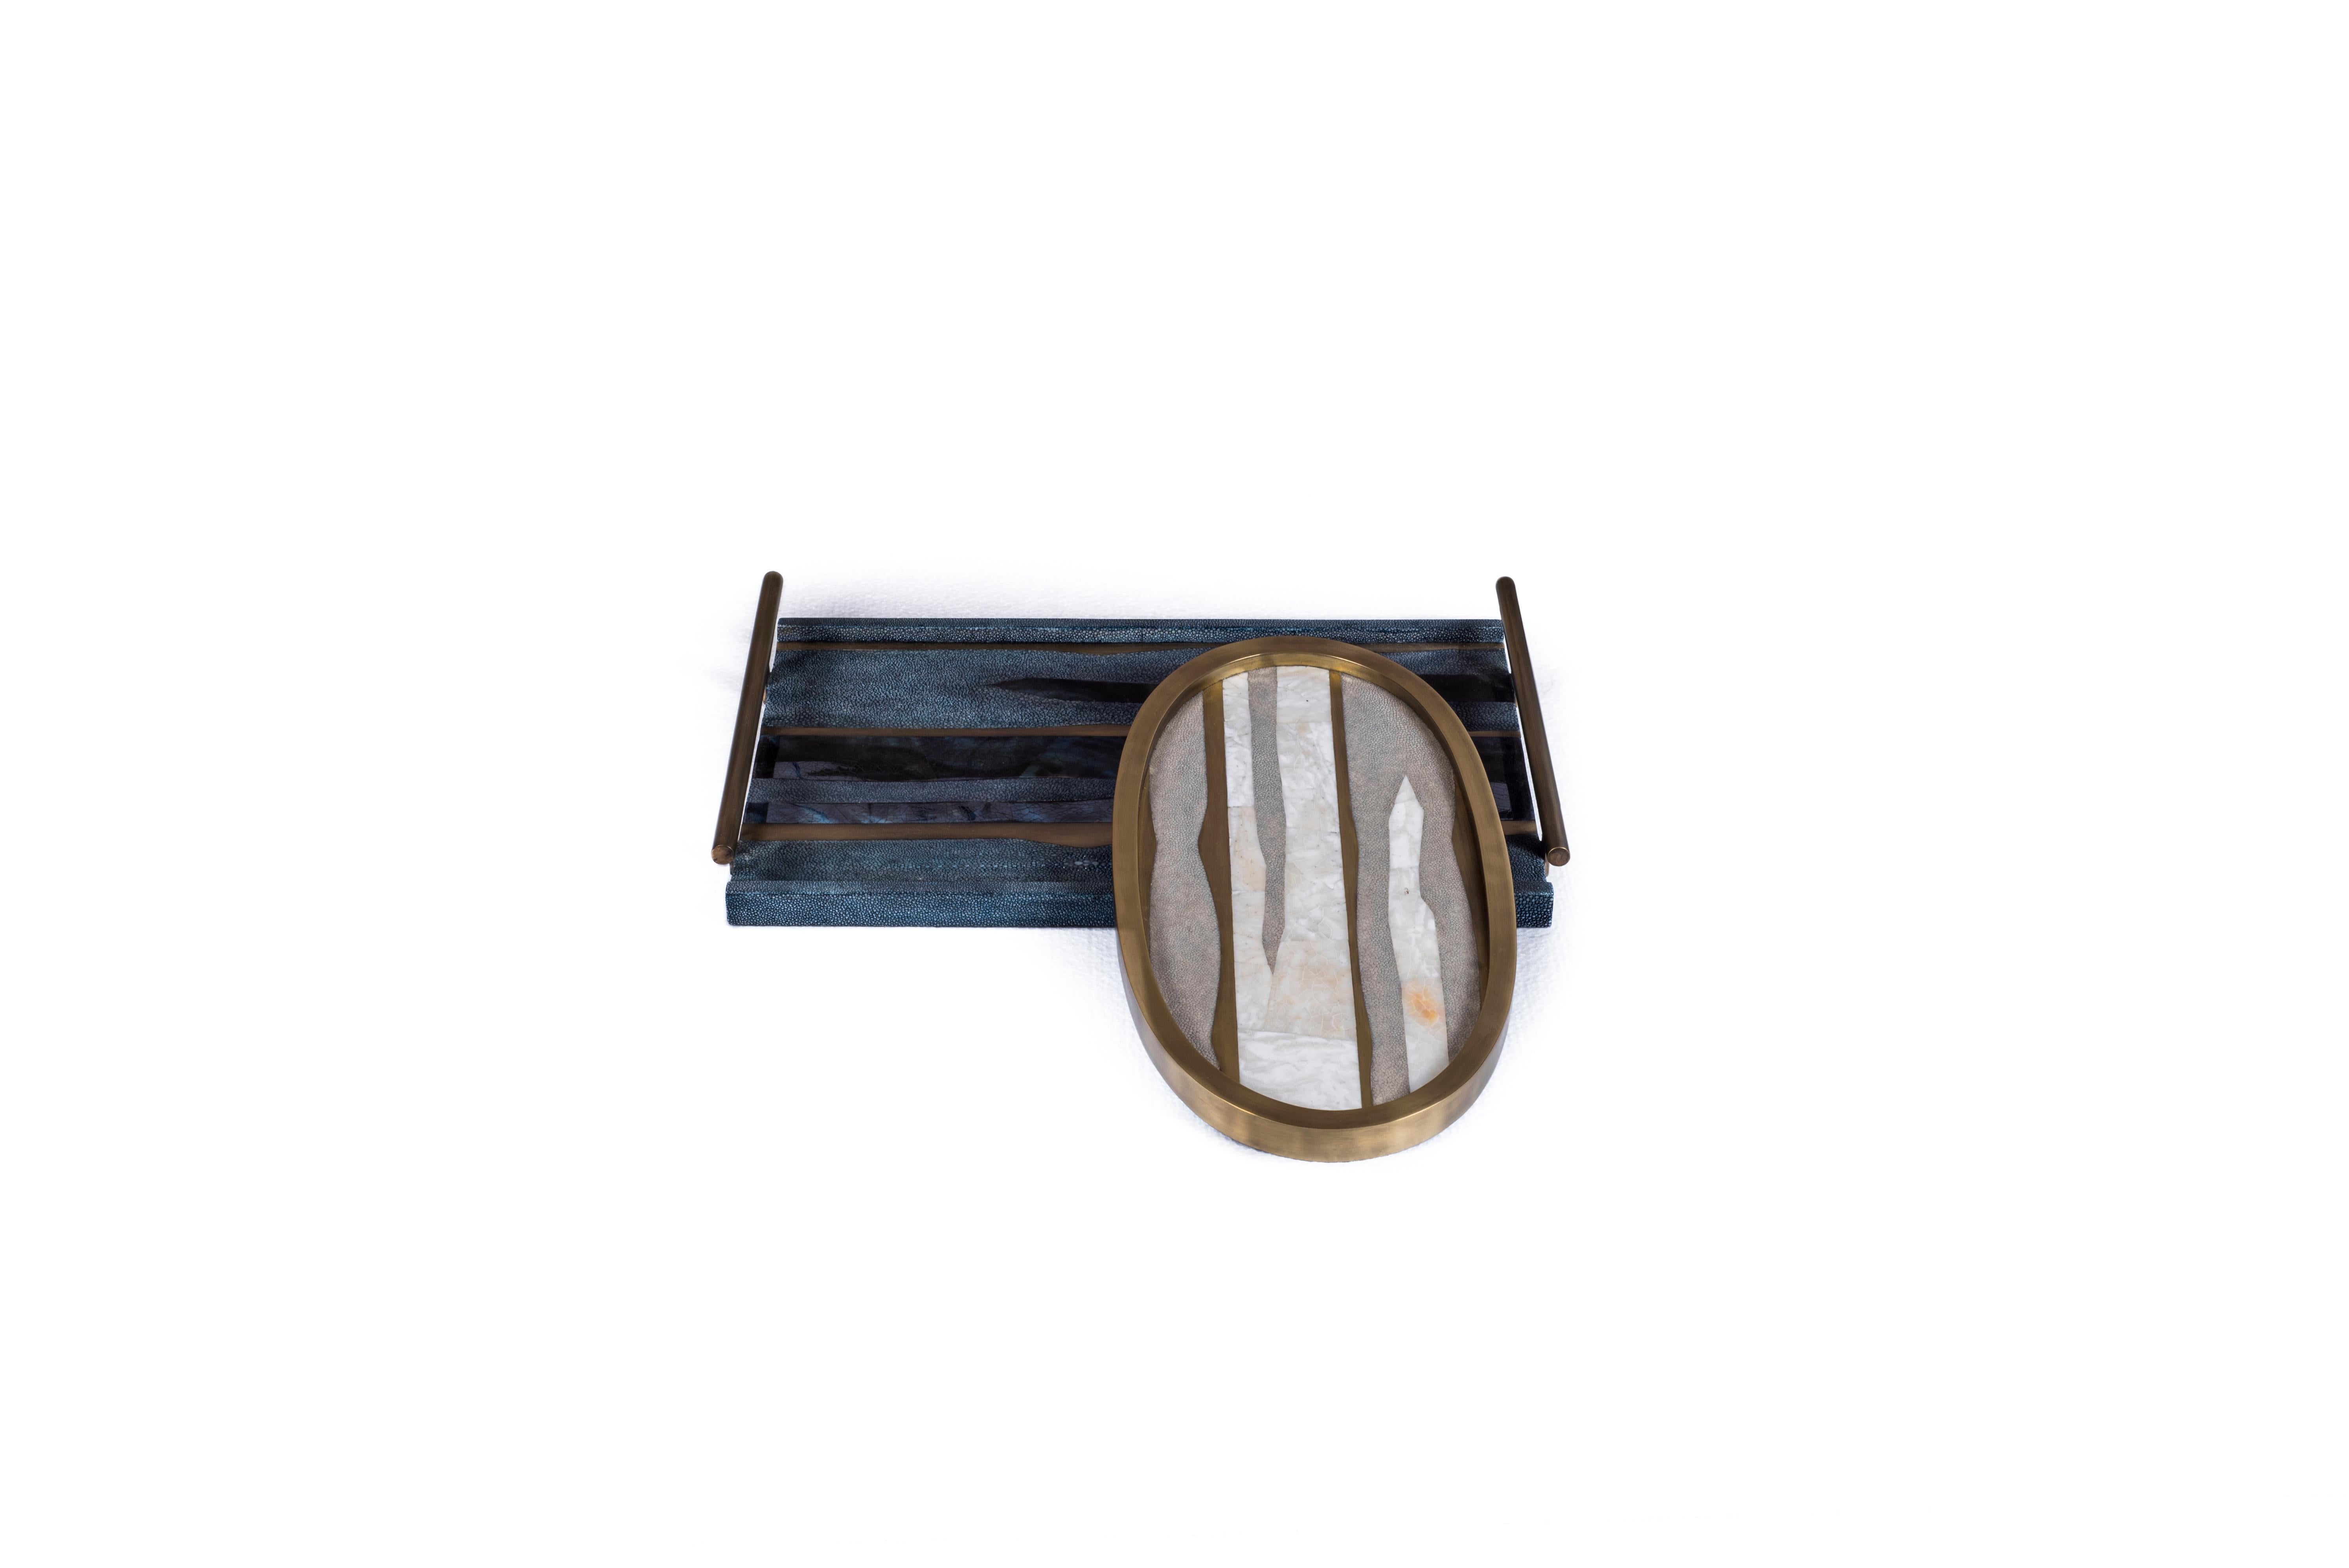 Oval Tray inlaid in Blue Shell and Brass by Kifu, Paris 2